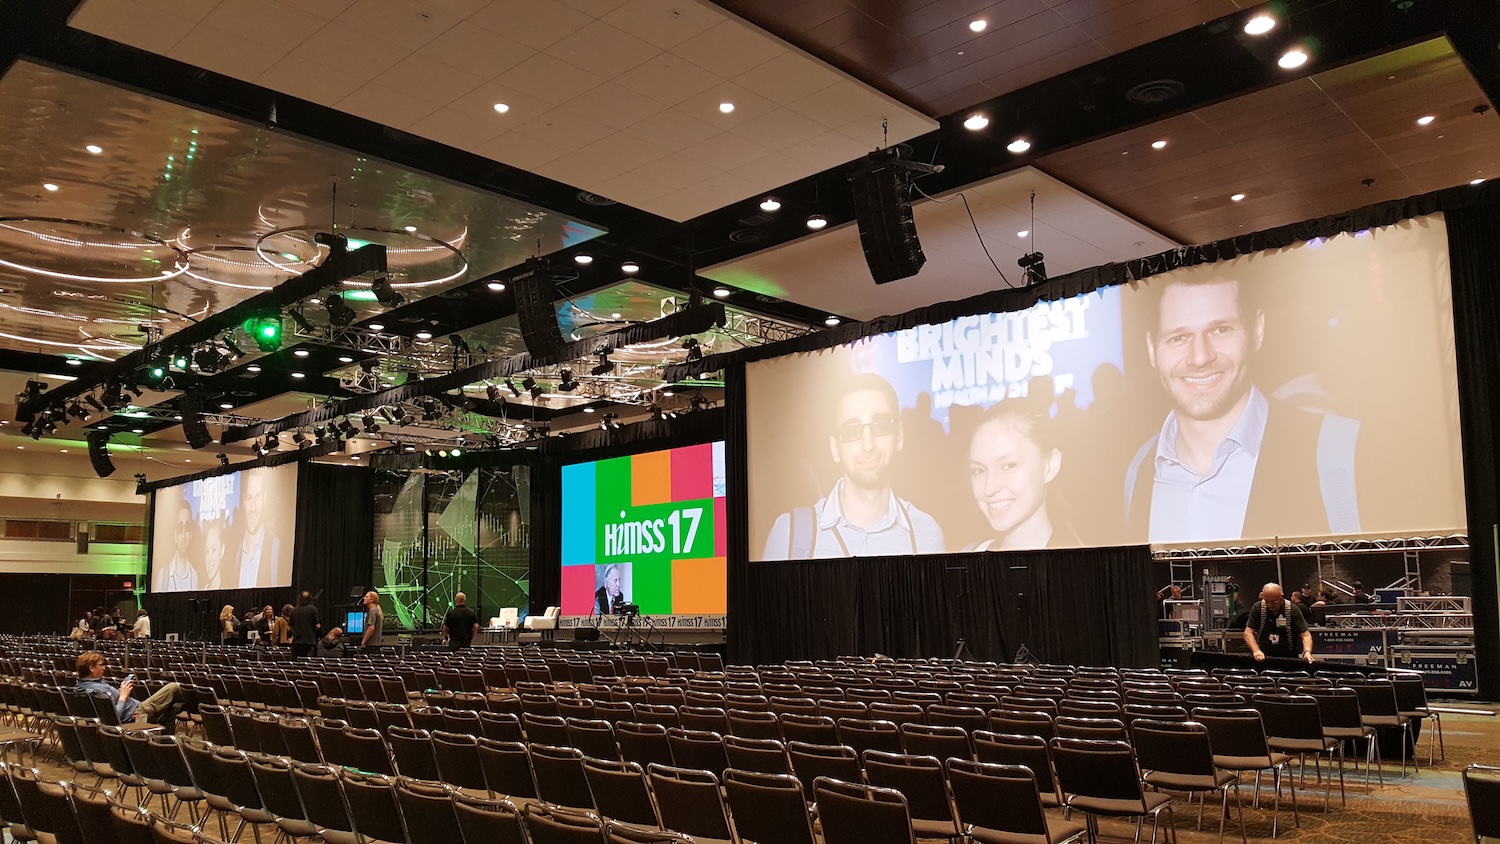 A conference hall set up with chairs and a stage with large screens, one displaying 'himss 17' and 'Brightest Minds' graphics, with lighting rigs overhead.